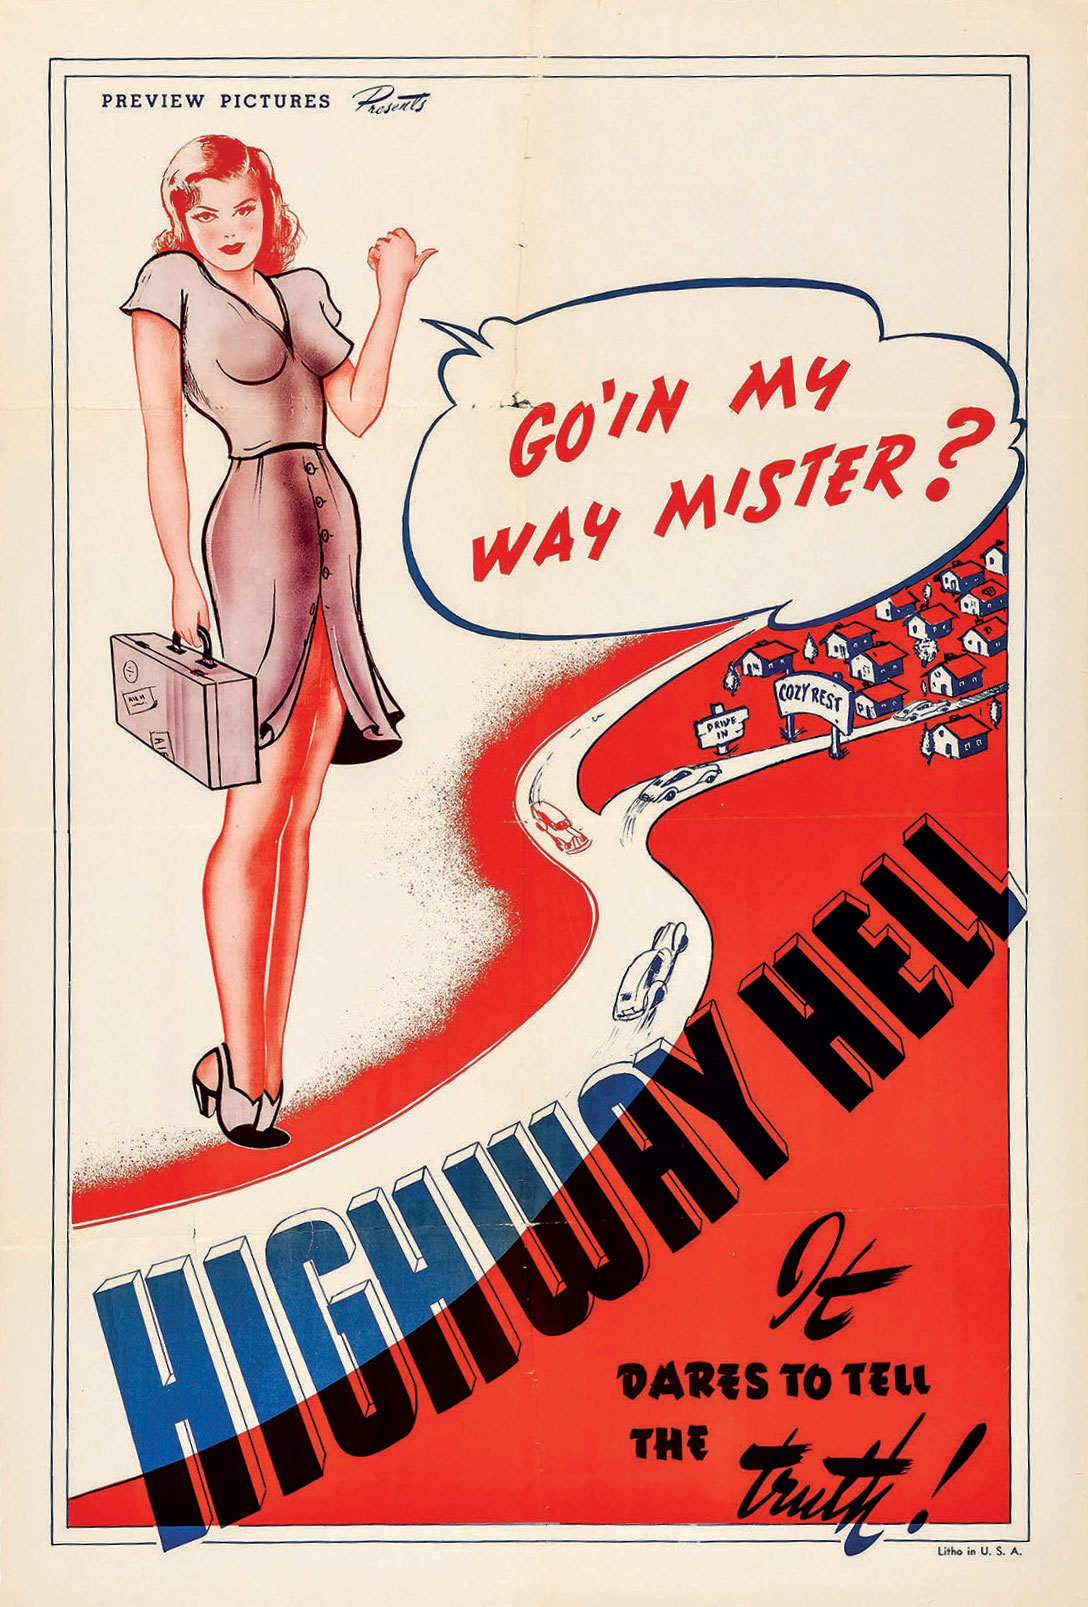 Highway Hell poster, 1940